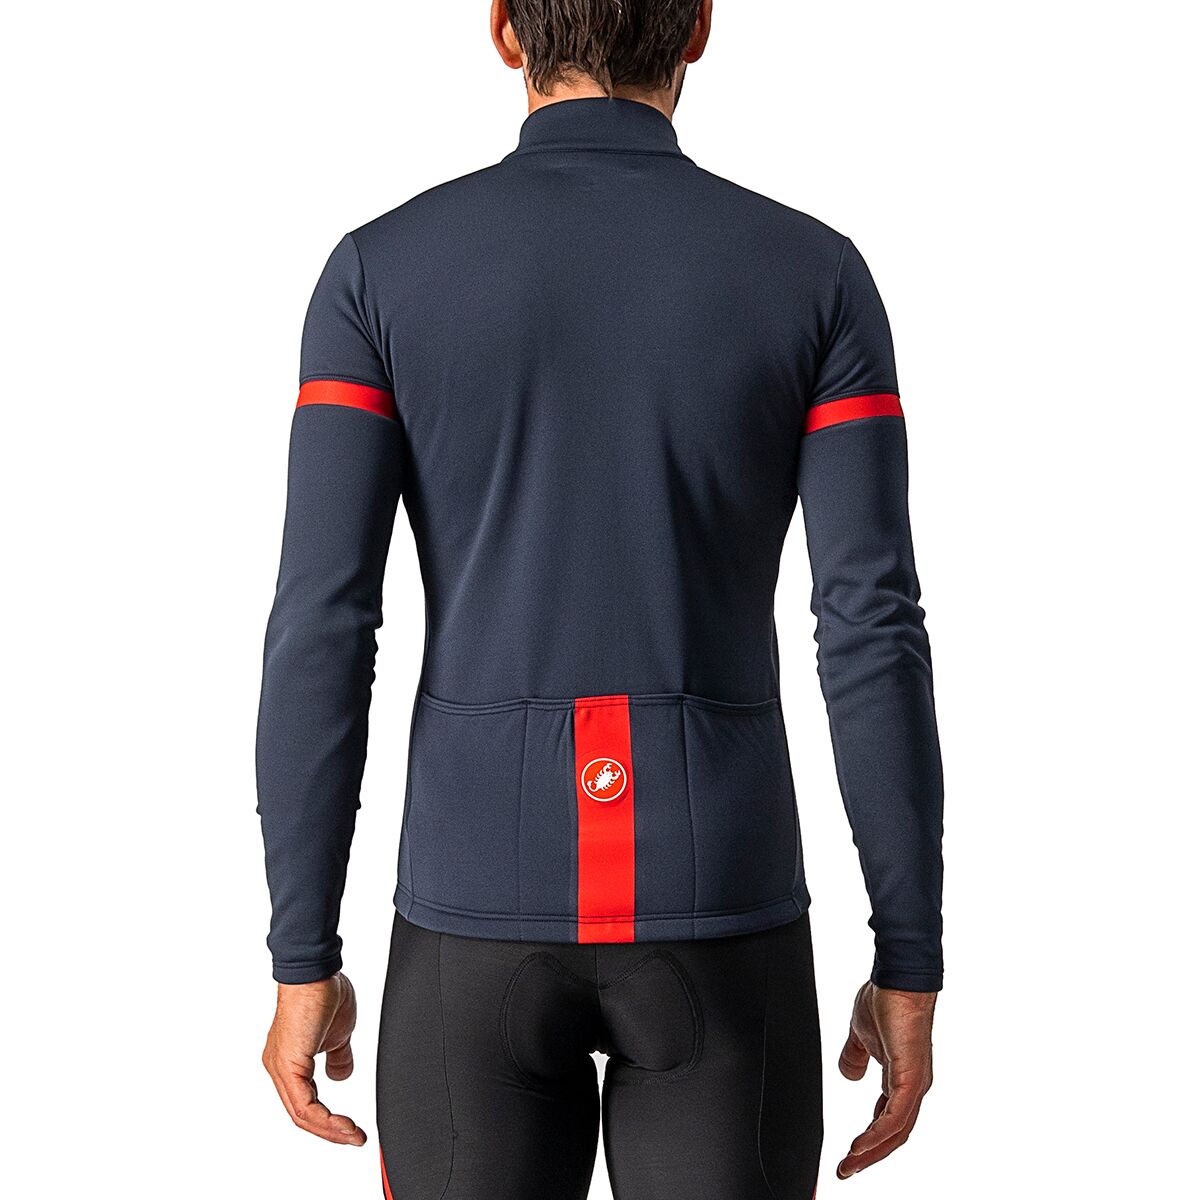 Black/Red Details about   NEW Castelli Fondo Thermo Long Sleeves Zip Bike Jersey show original title 